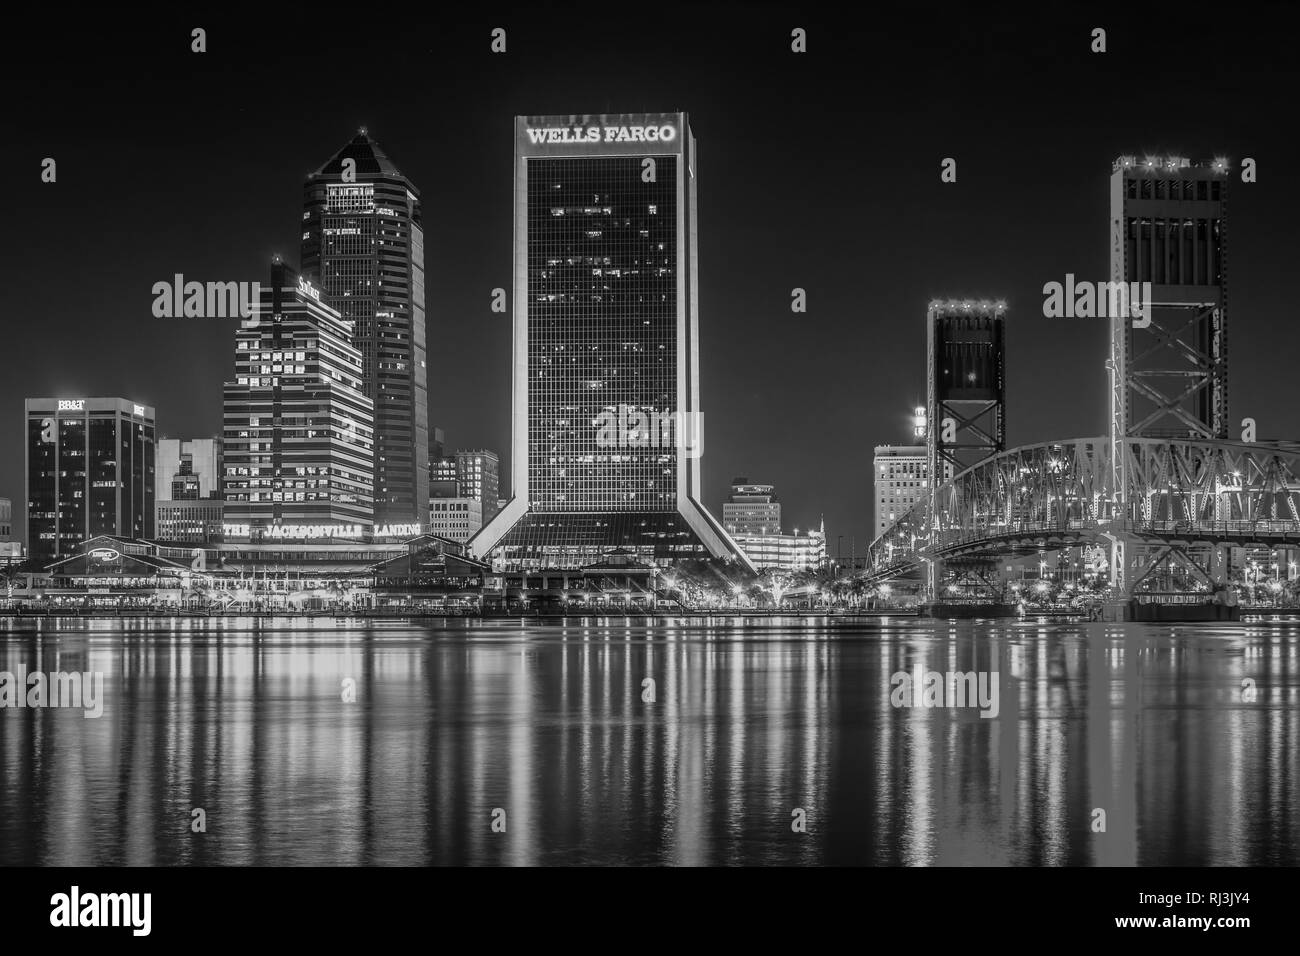 The skyline reflecting in the St. John's River at night in Jacksonvile, Florida. Stock Photo